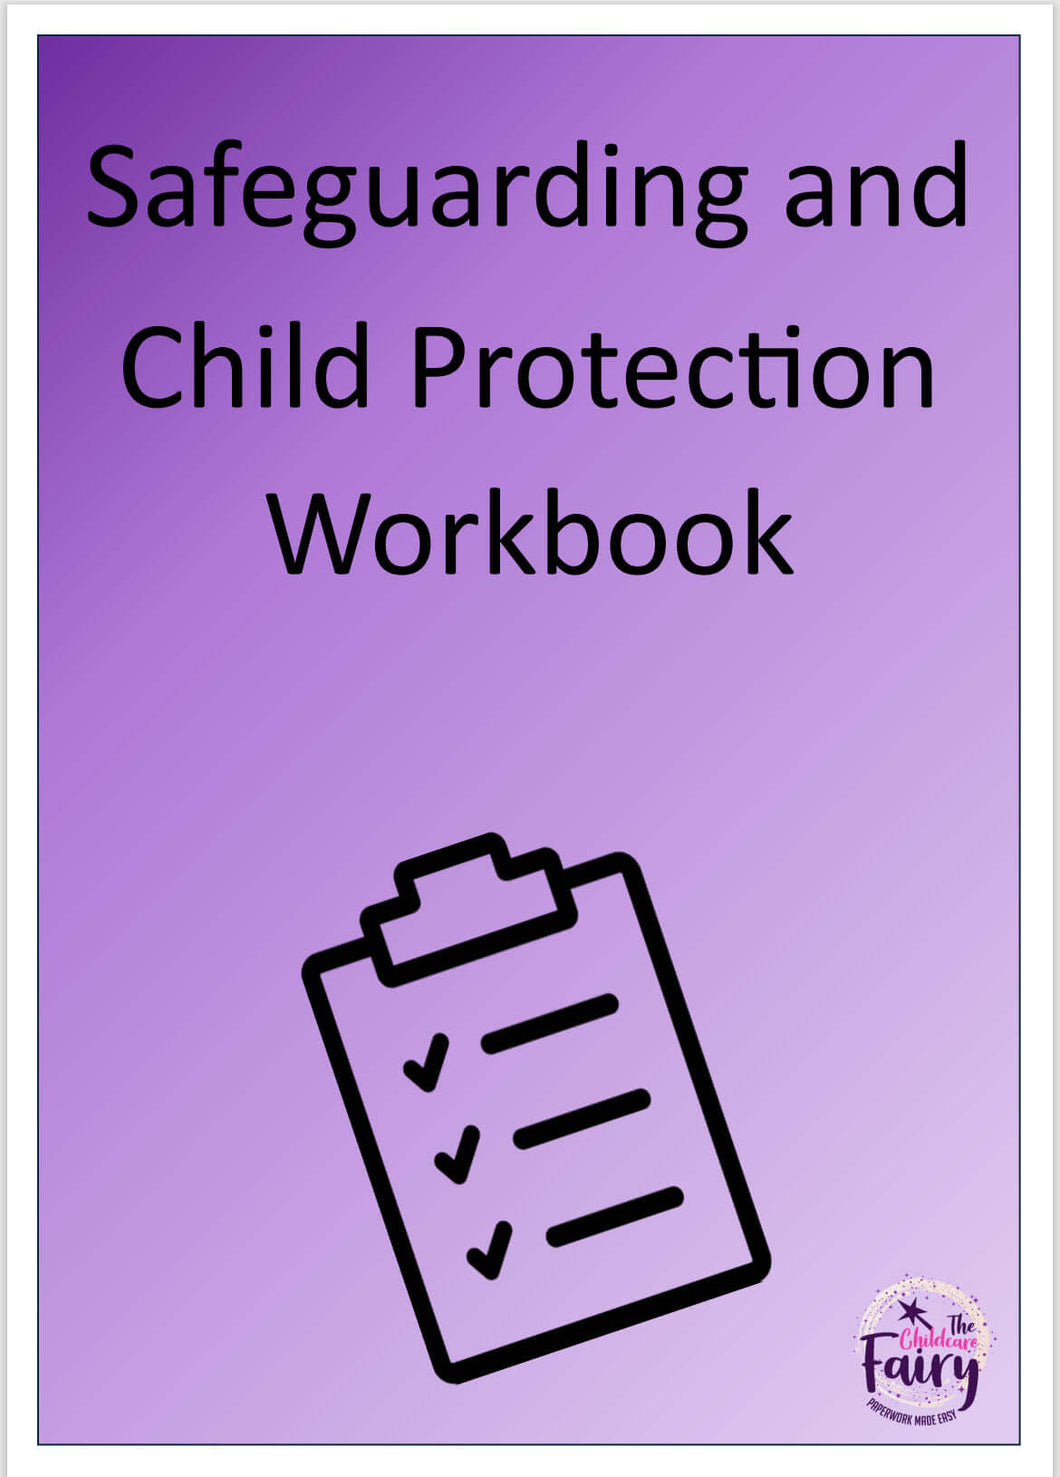 Safeguarding and Child Protection Workbook